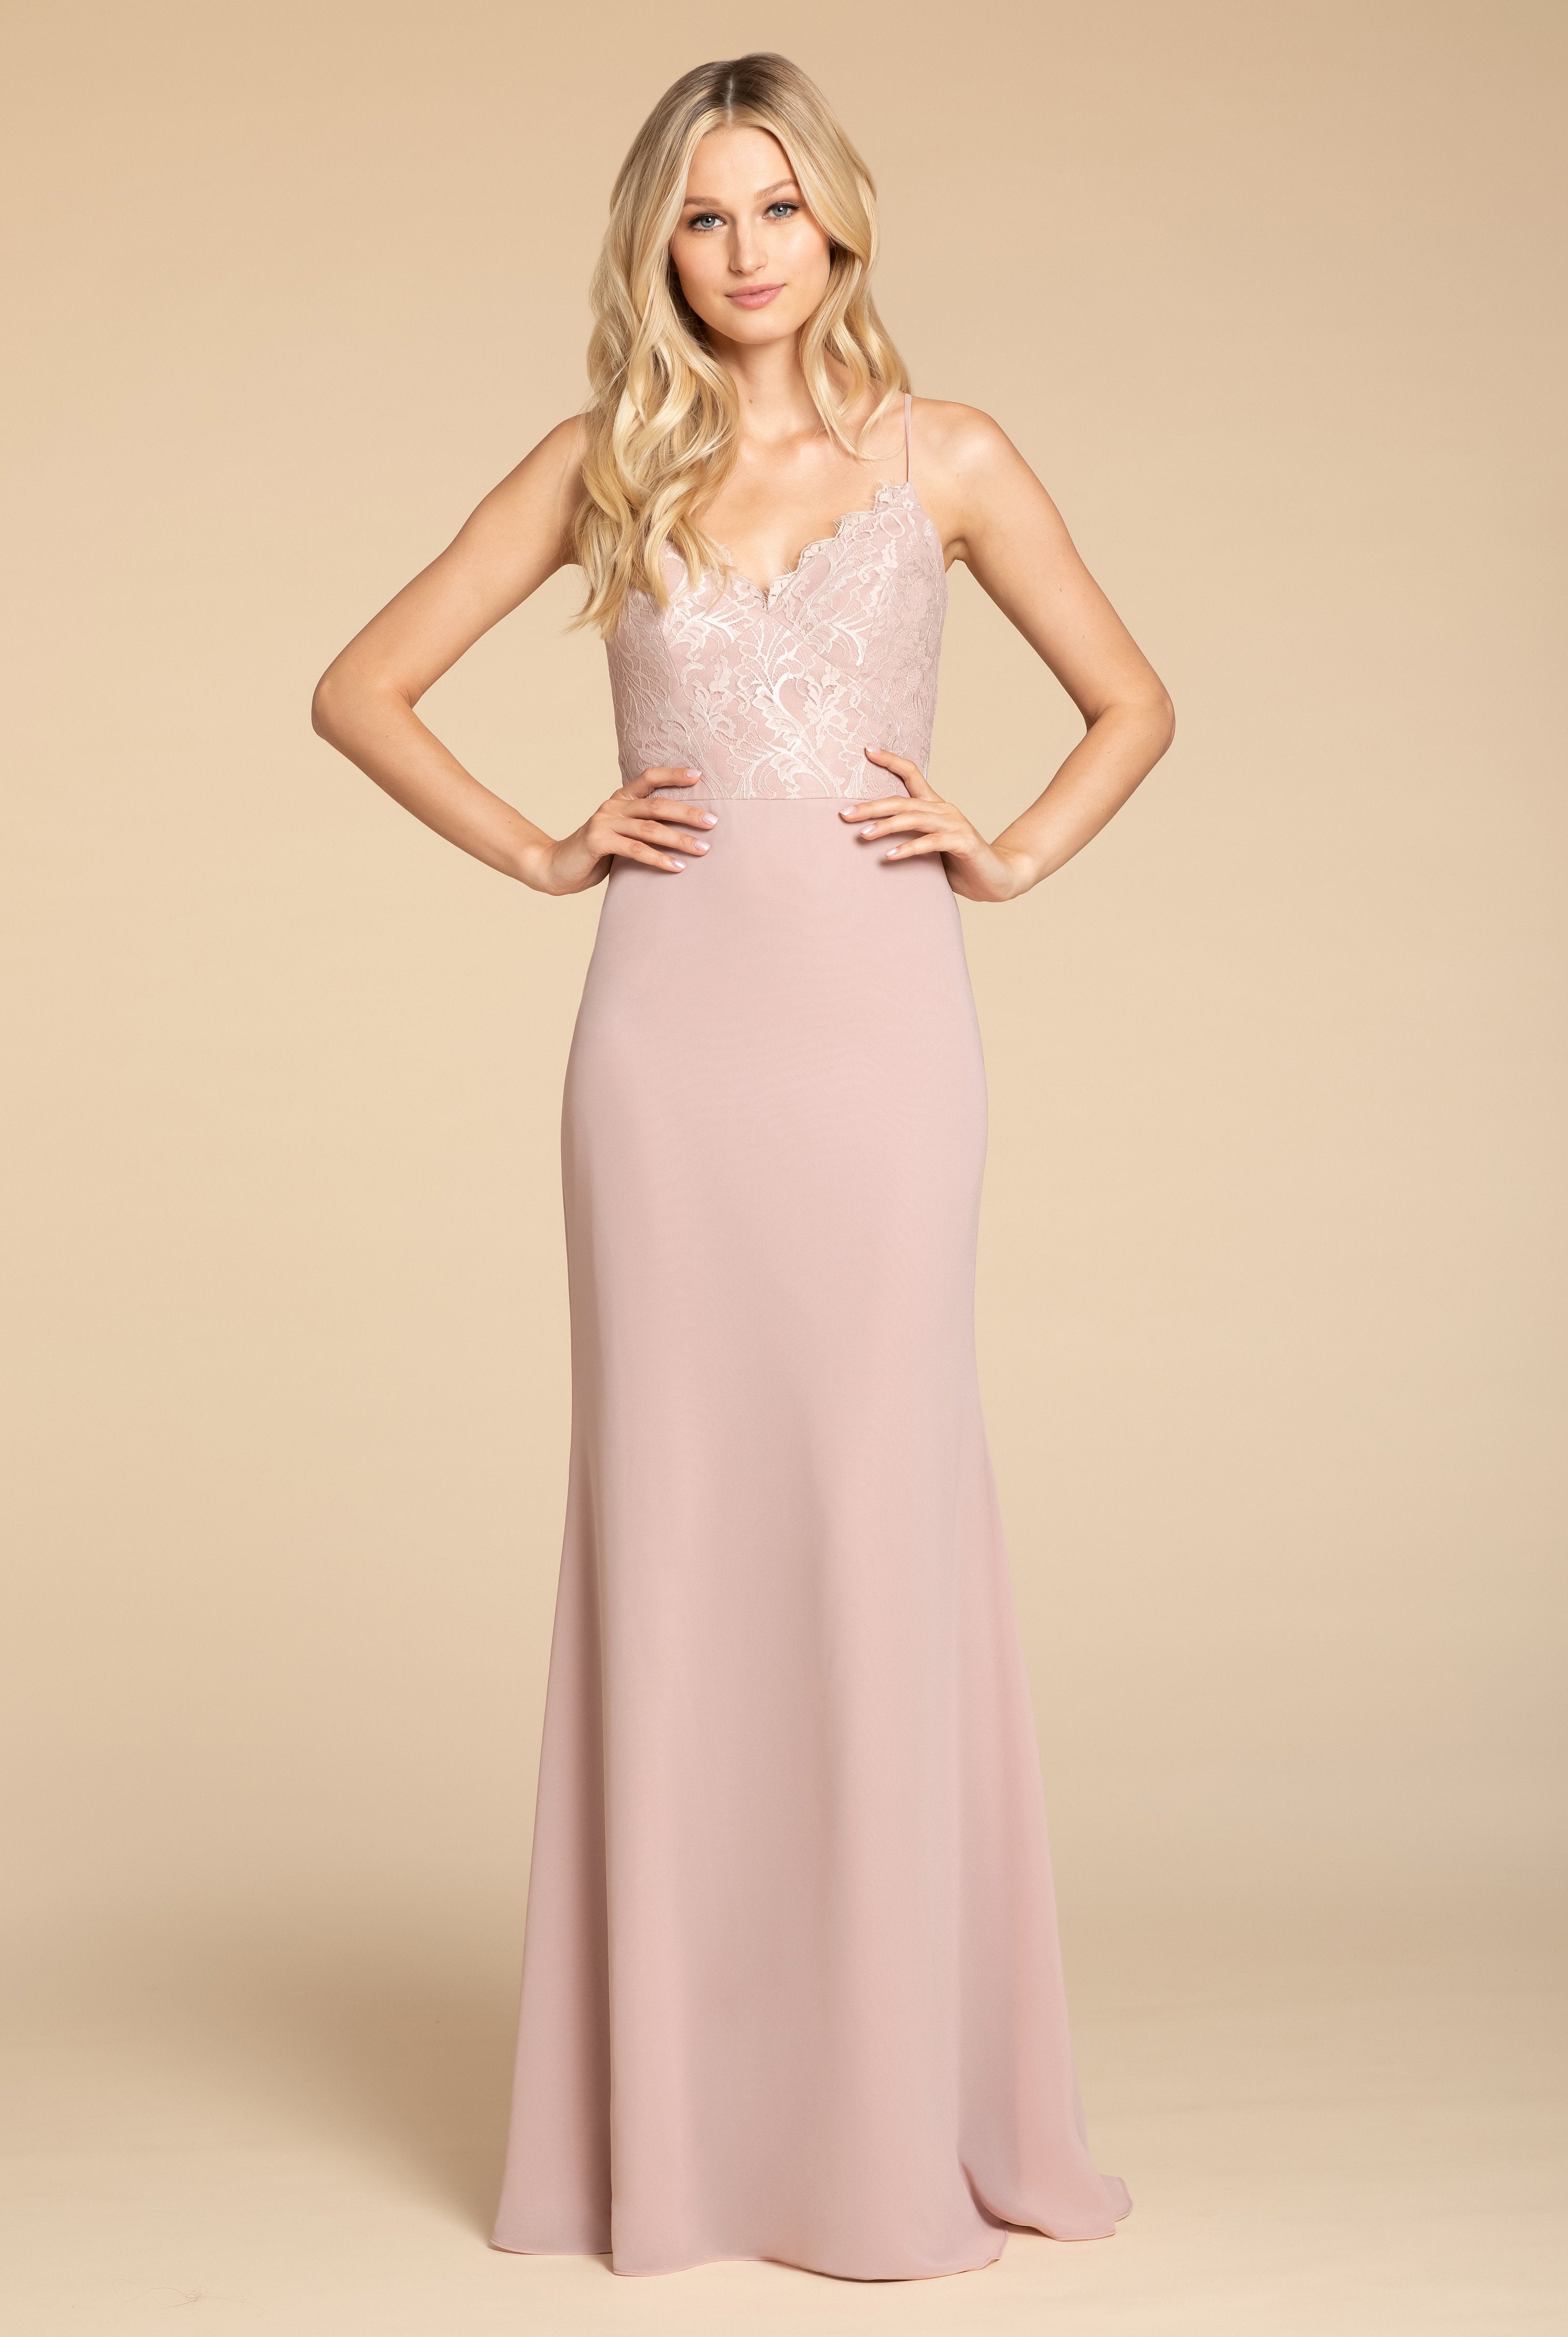 hayley paige occasion dresses